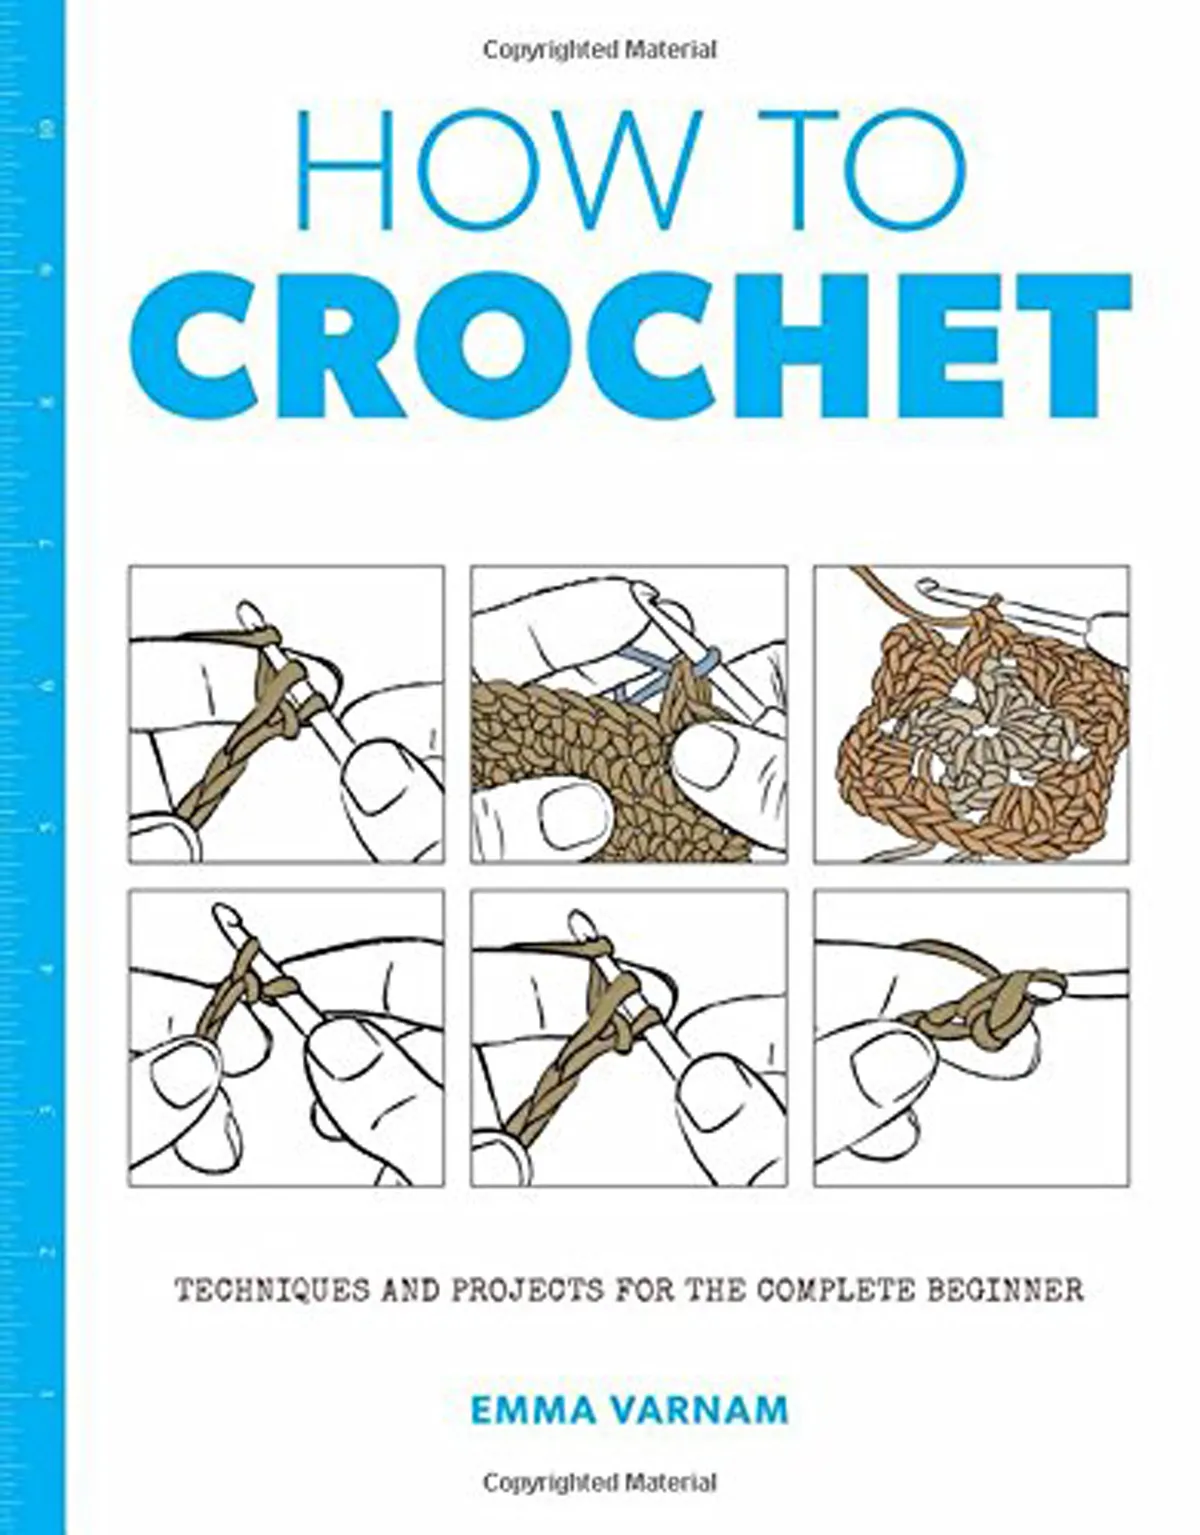 20 Best Crocheting Books of All Time - BookAuthority